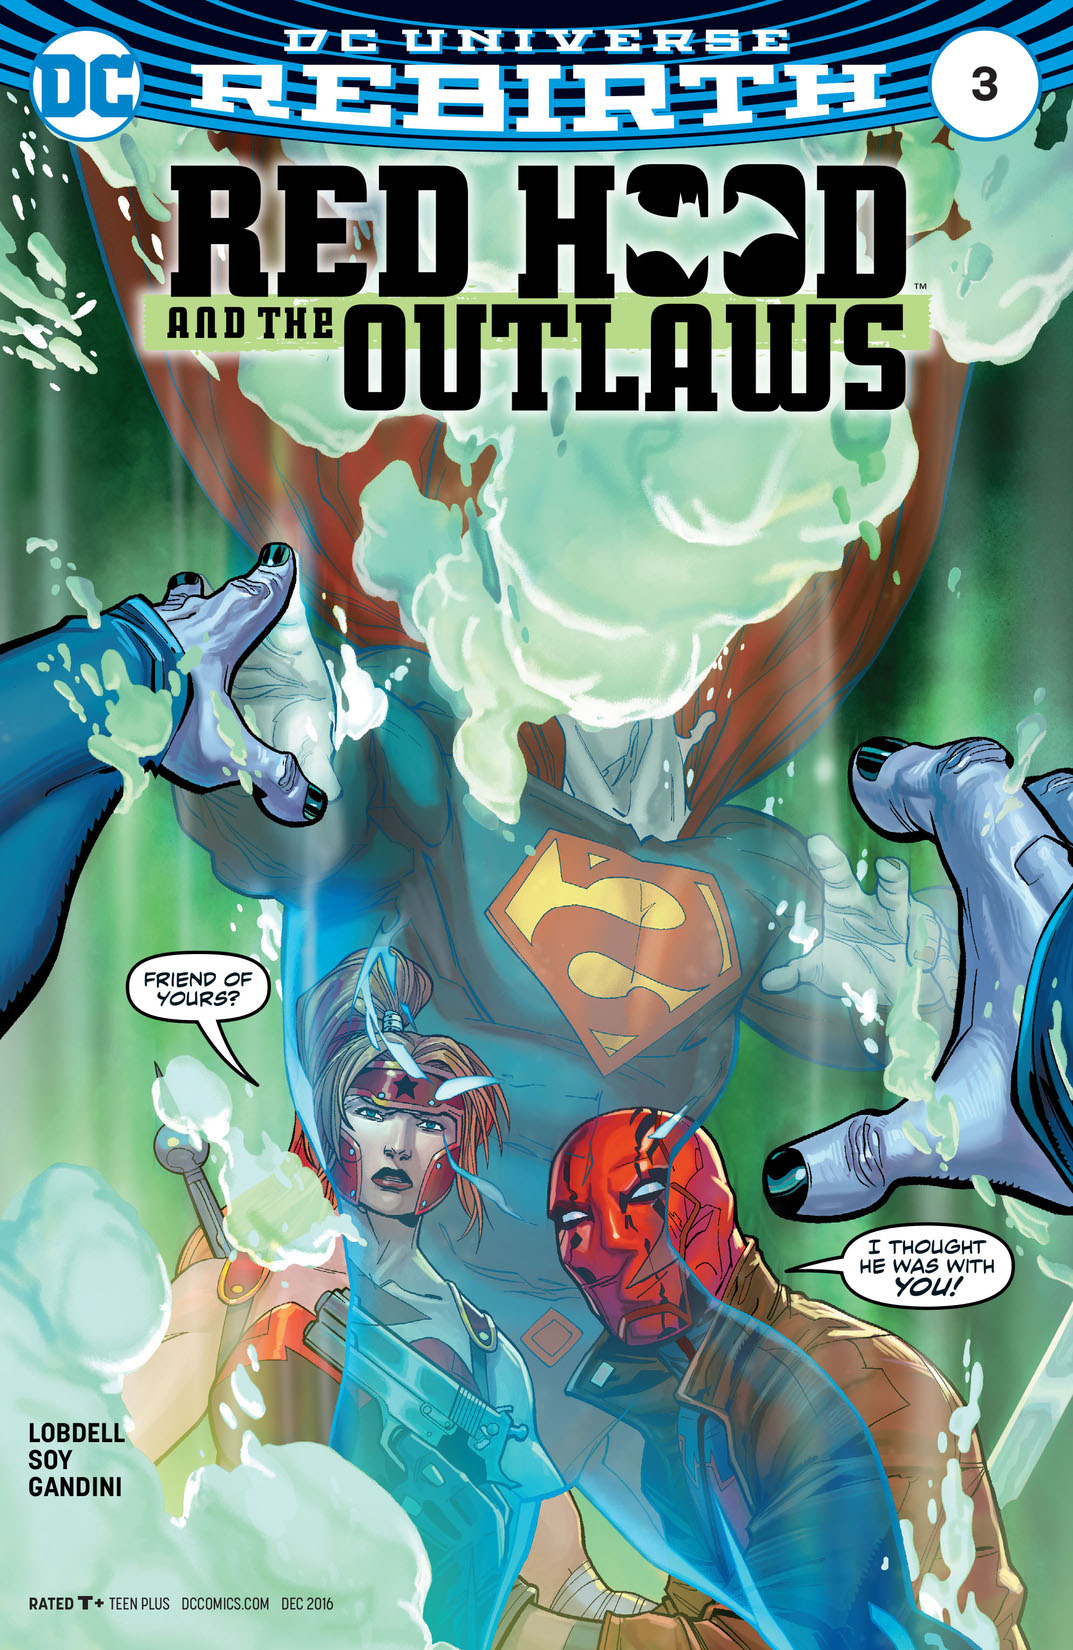 Red Hood and the Outlaws (2016-) #3 preview images